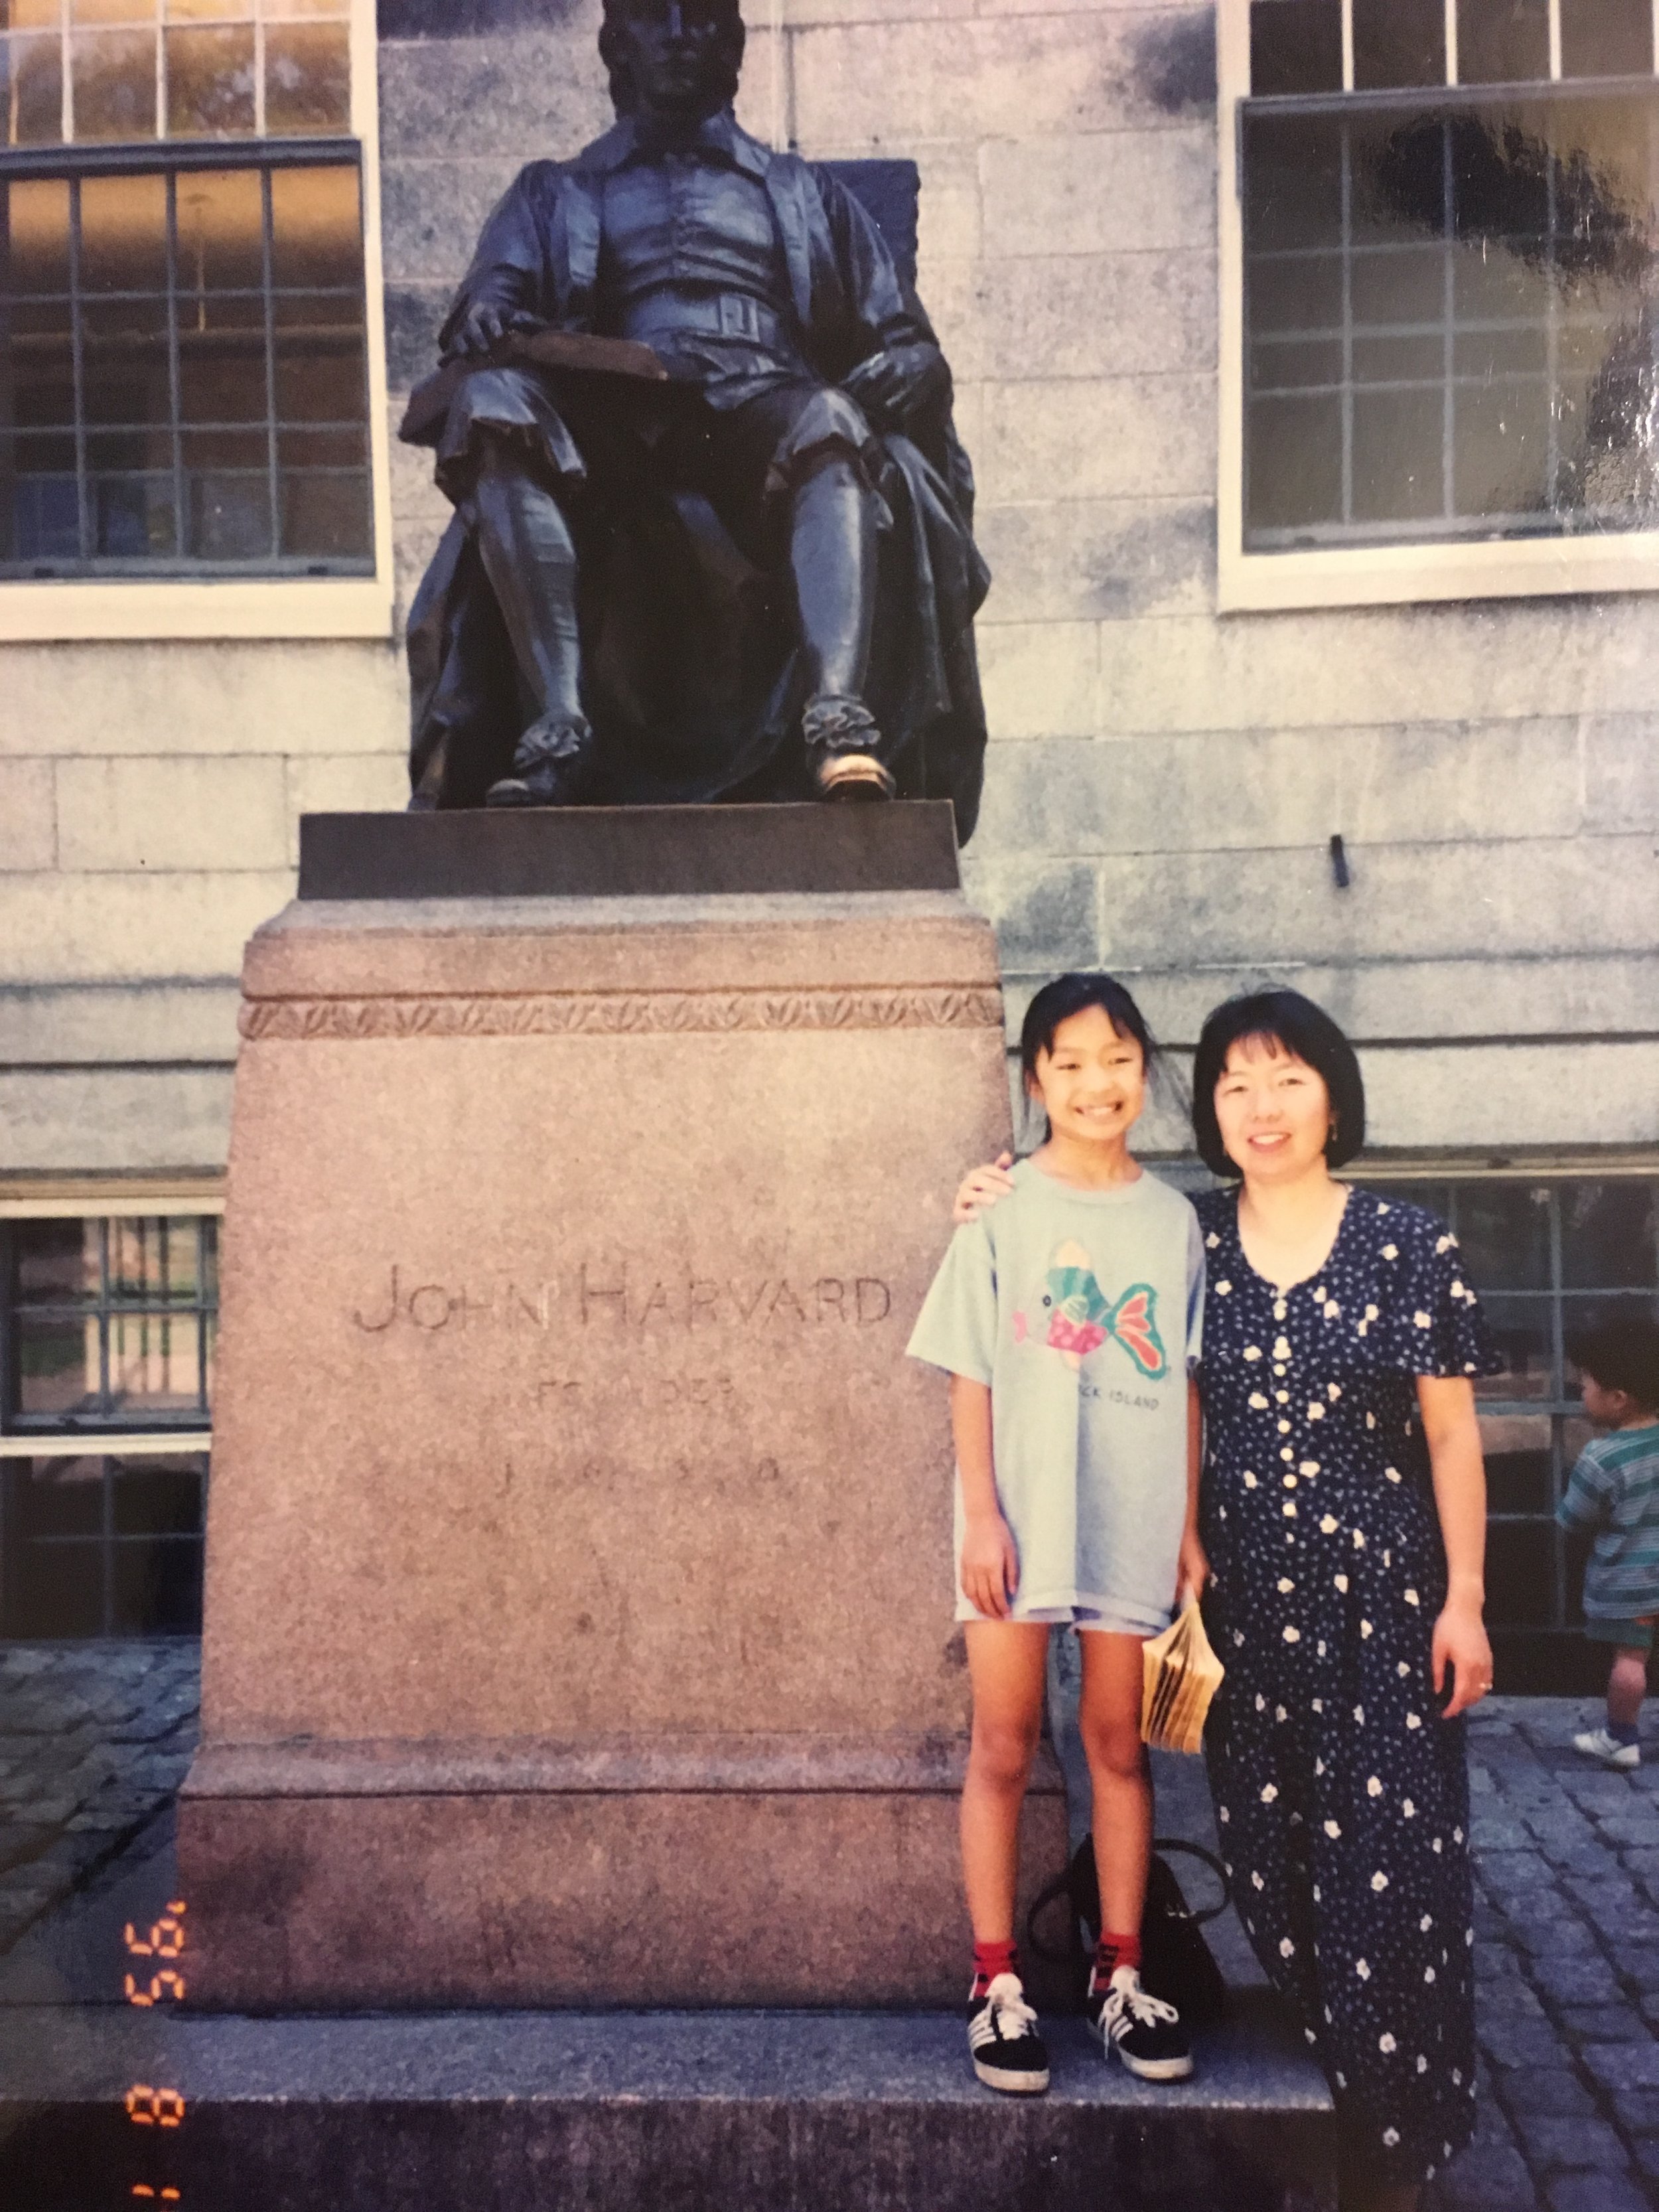  “My mom and me in Cambridge, MA, touring Harvard campus. I would return here as a postdoc&nbsp;20 years later.” - Caroline Hu 